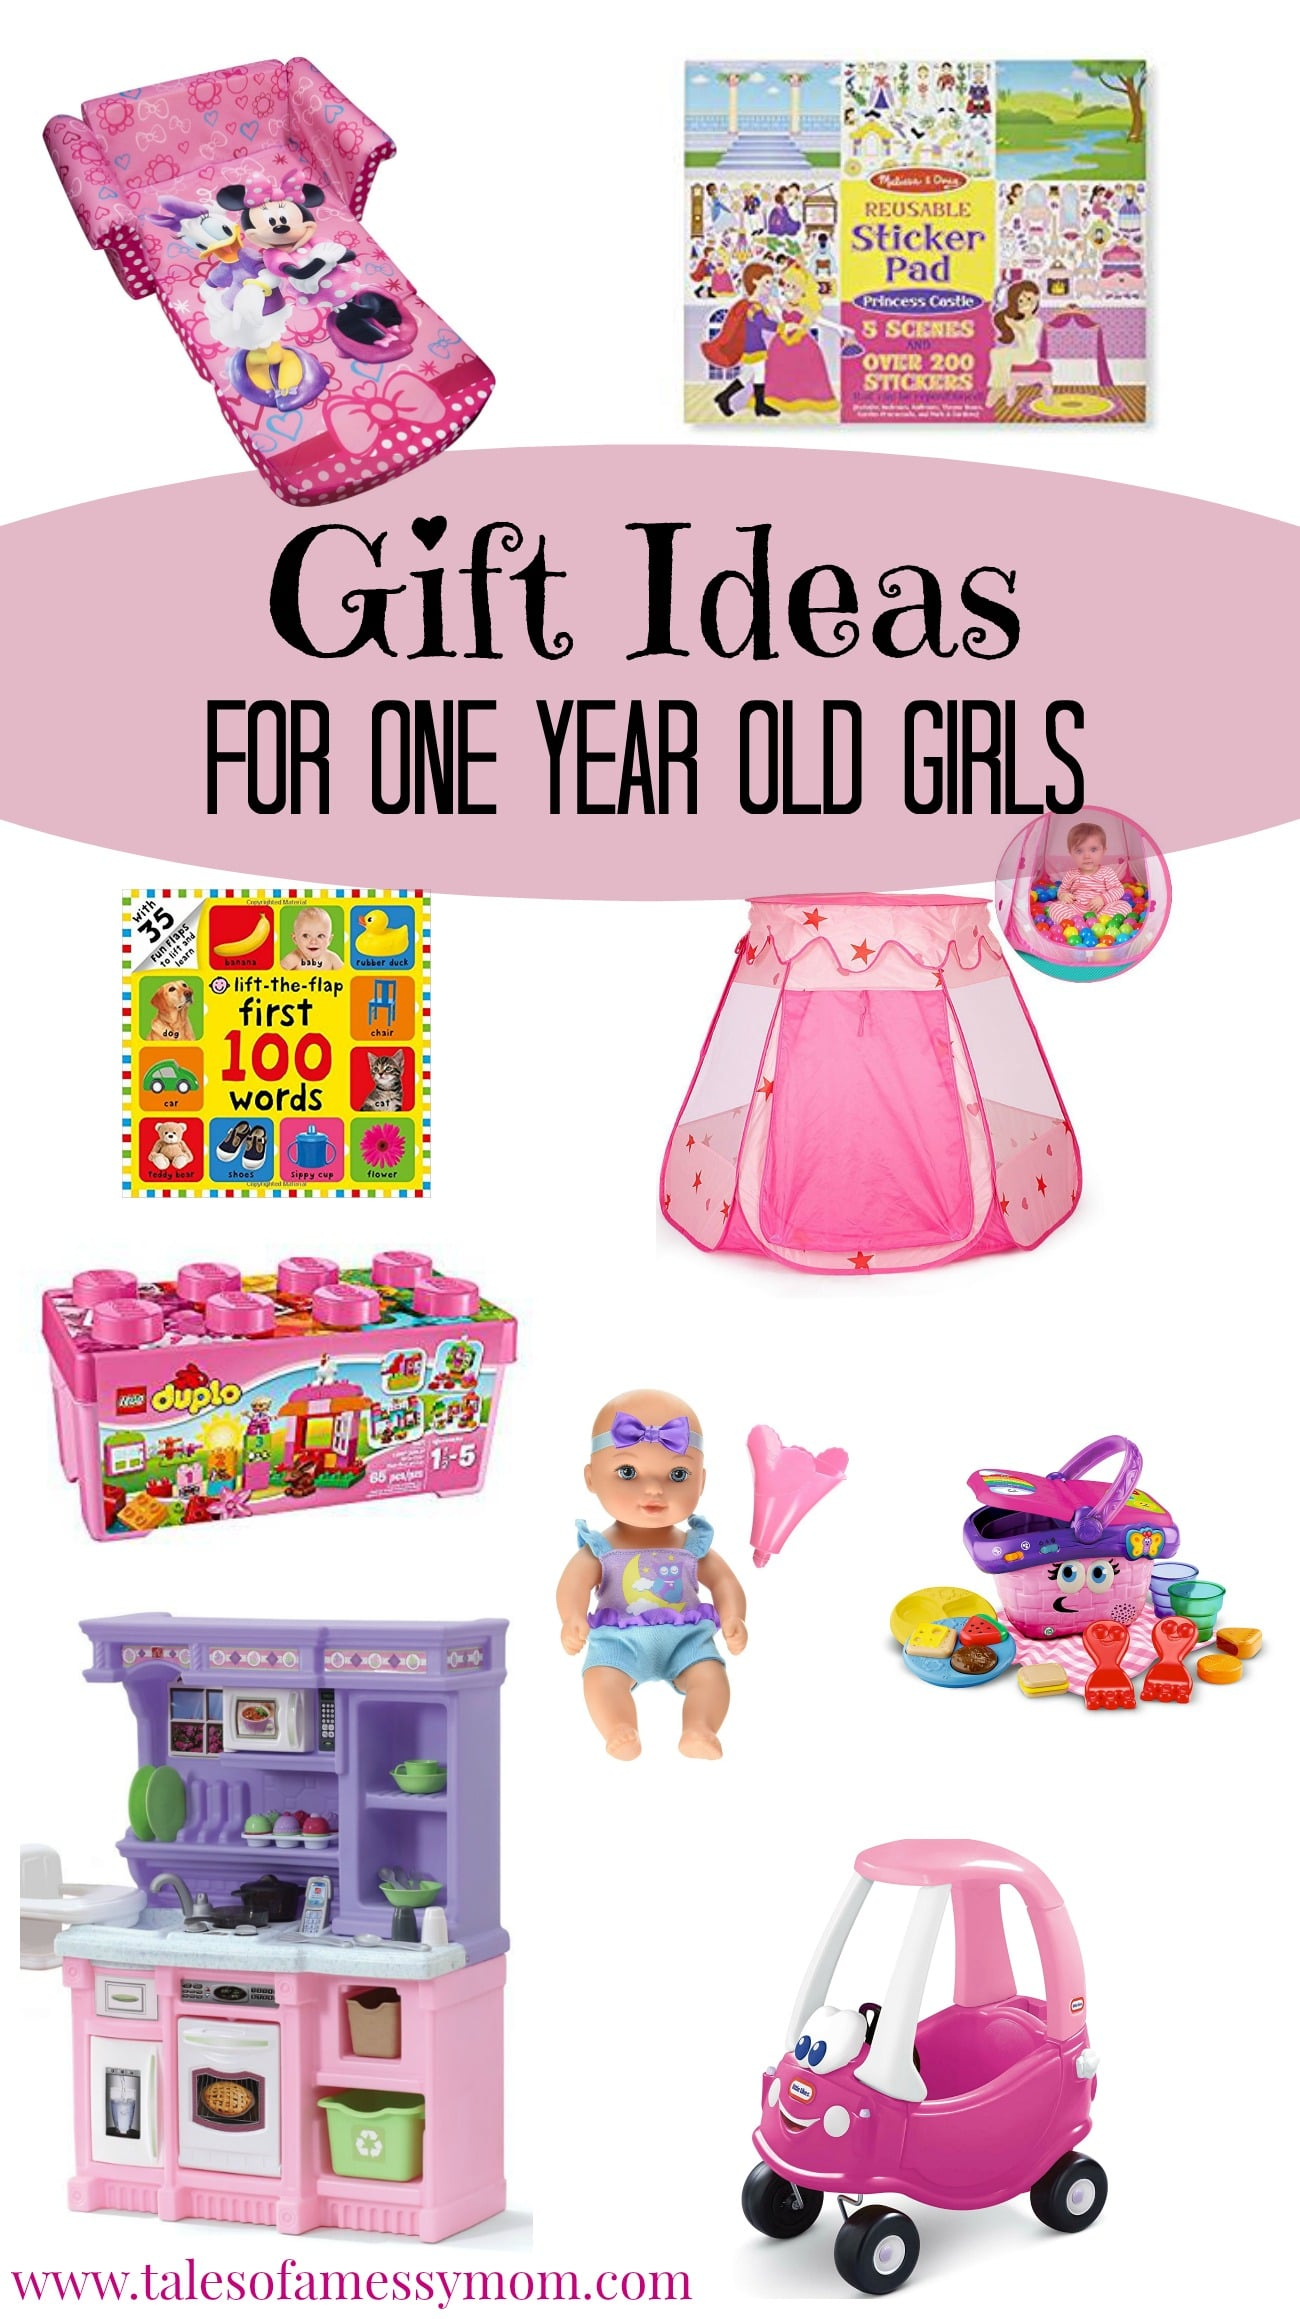 10 Lovable Gift Ideas For A 1 Year Old Girl gift ideas for one year old girls tales of a messy mom 10 2022